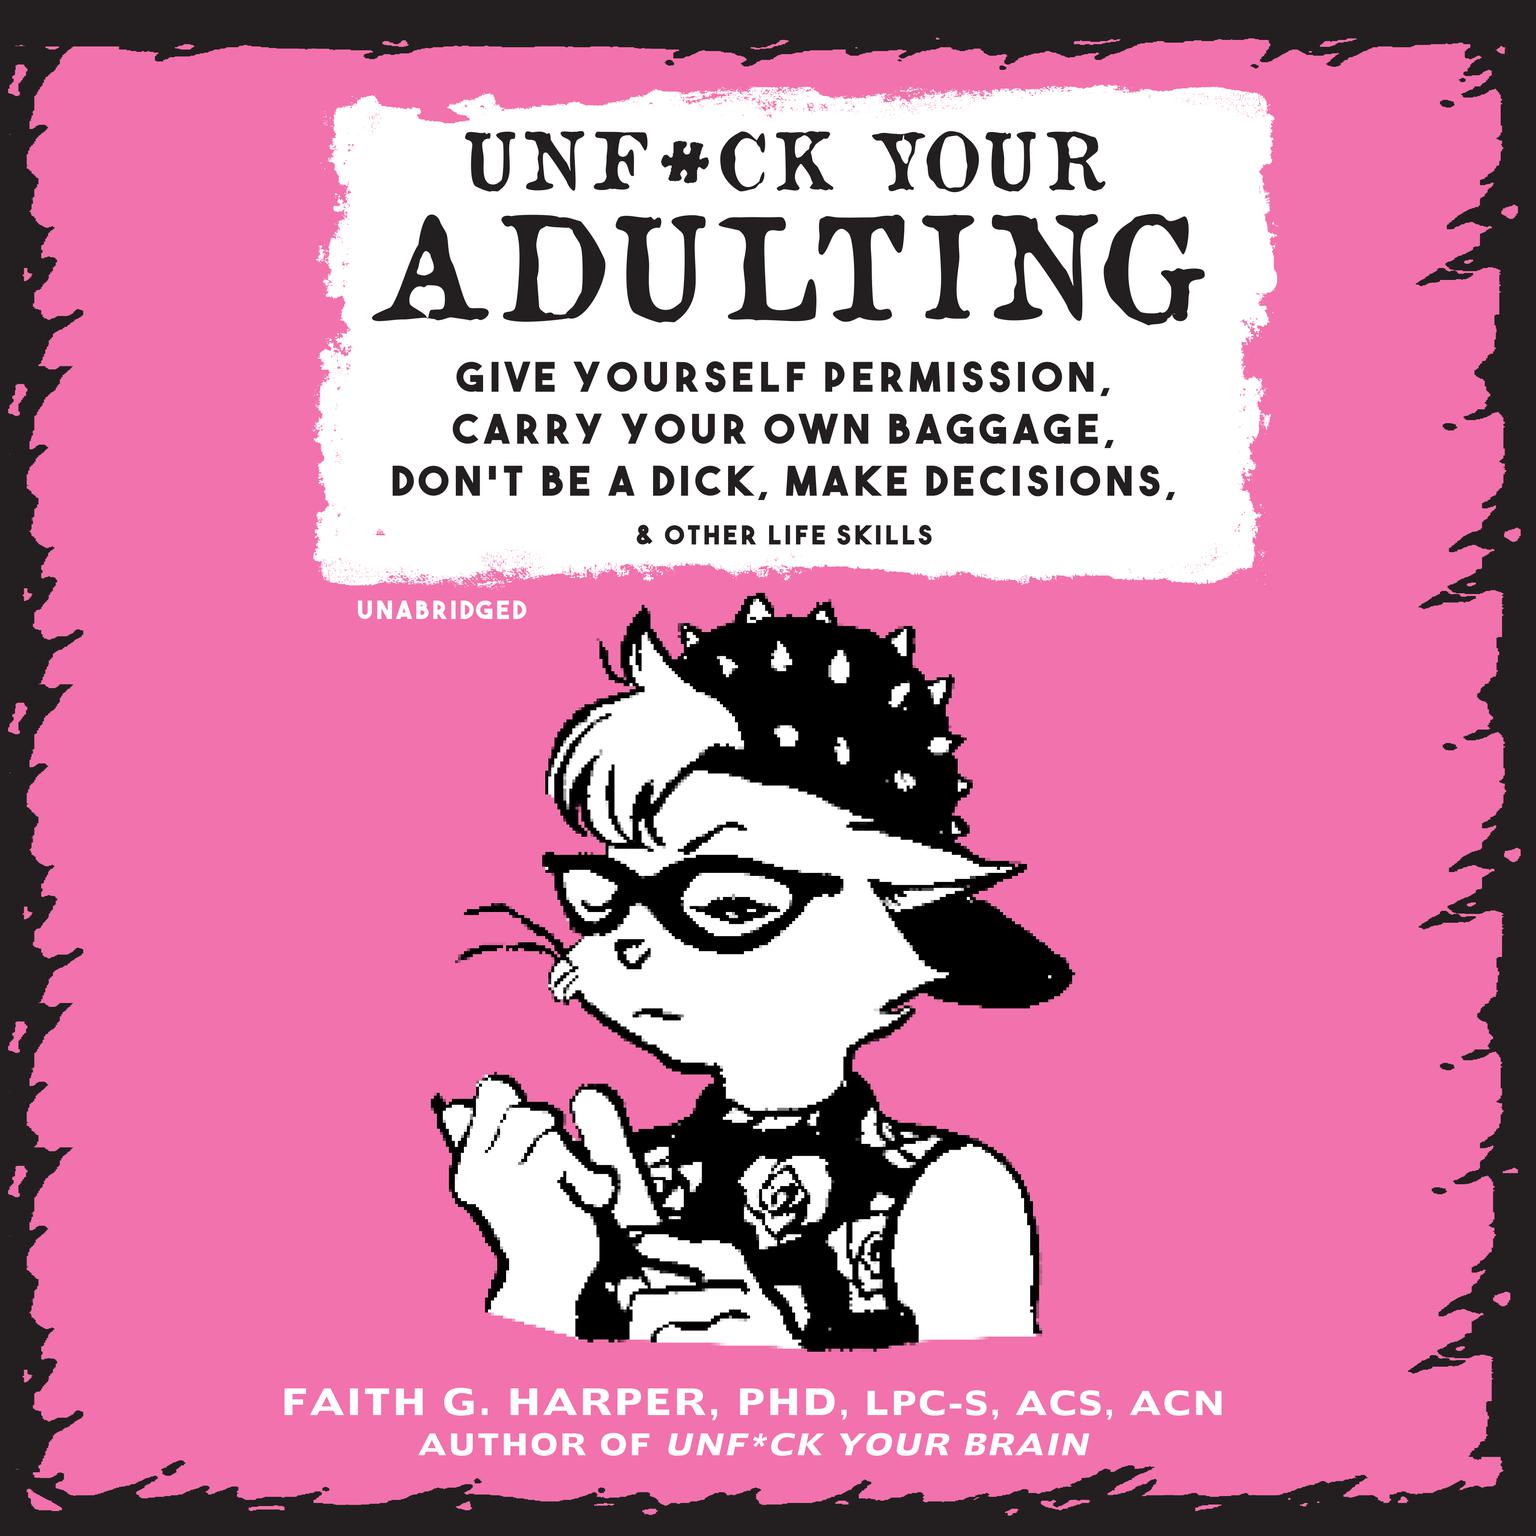 Unf*ck Your Adulting: Give Yourself Permission, Carry Your Own Baggage, Don’t Be a Dick, Make Decisions, and Other Life Skills Audiobook, by Faith G. Harper